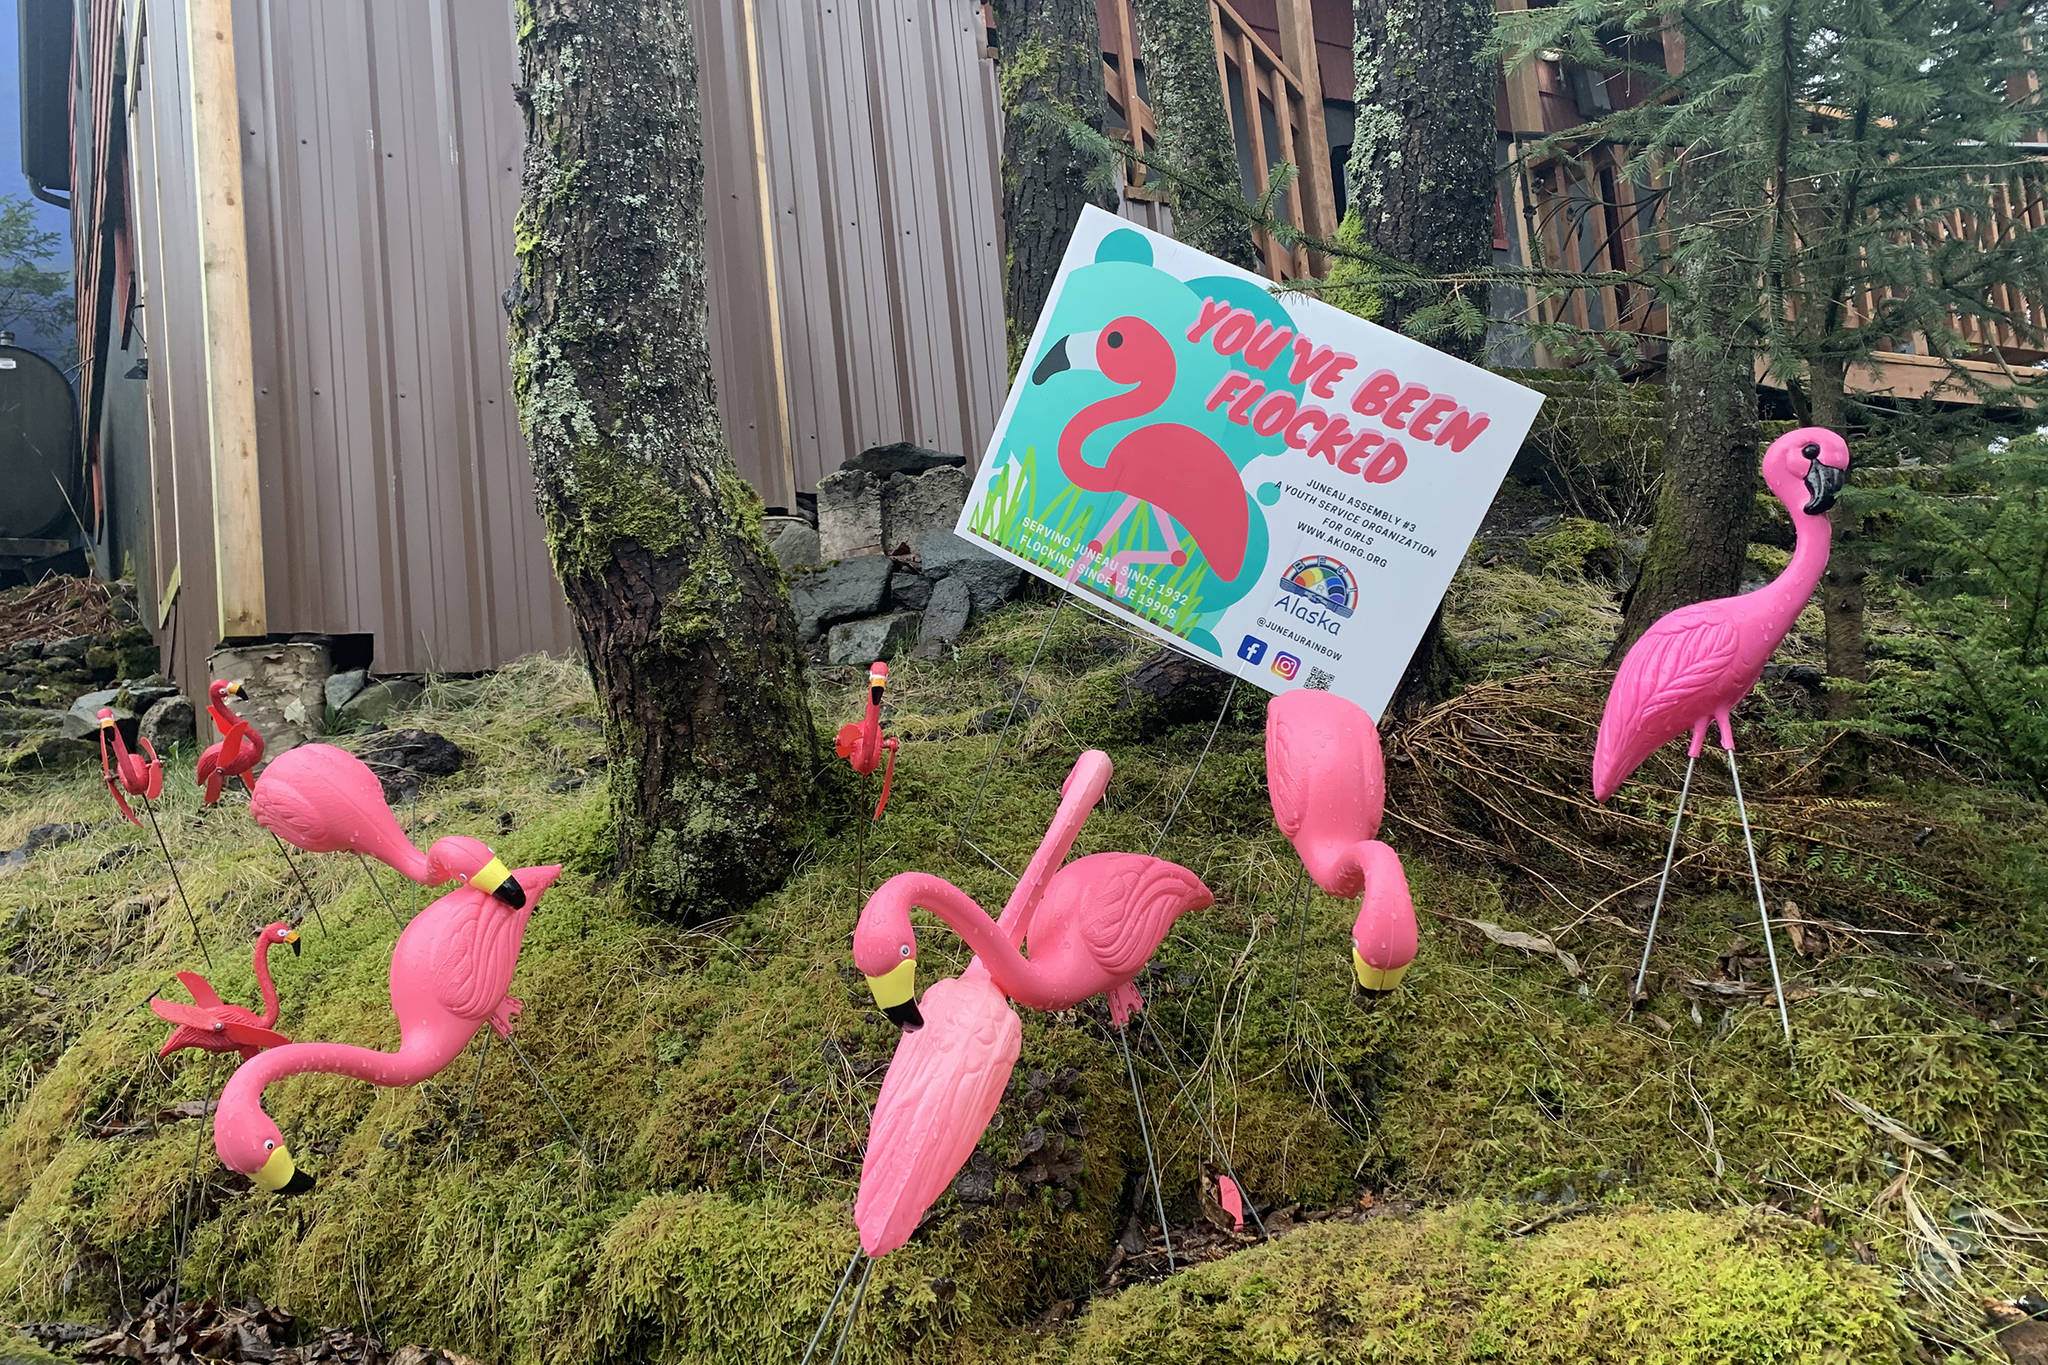 Dana Zigmund / Juneau Empire
A flamboyance of flamingos greets Juneau residents on Calhoun Avenue near the State Office Building last week. The local International Order of the Rainbow Girls service sorority is deploying the birds in a new location each week to bring joy to Juneau during a difficult time.